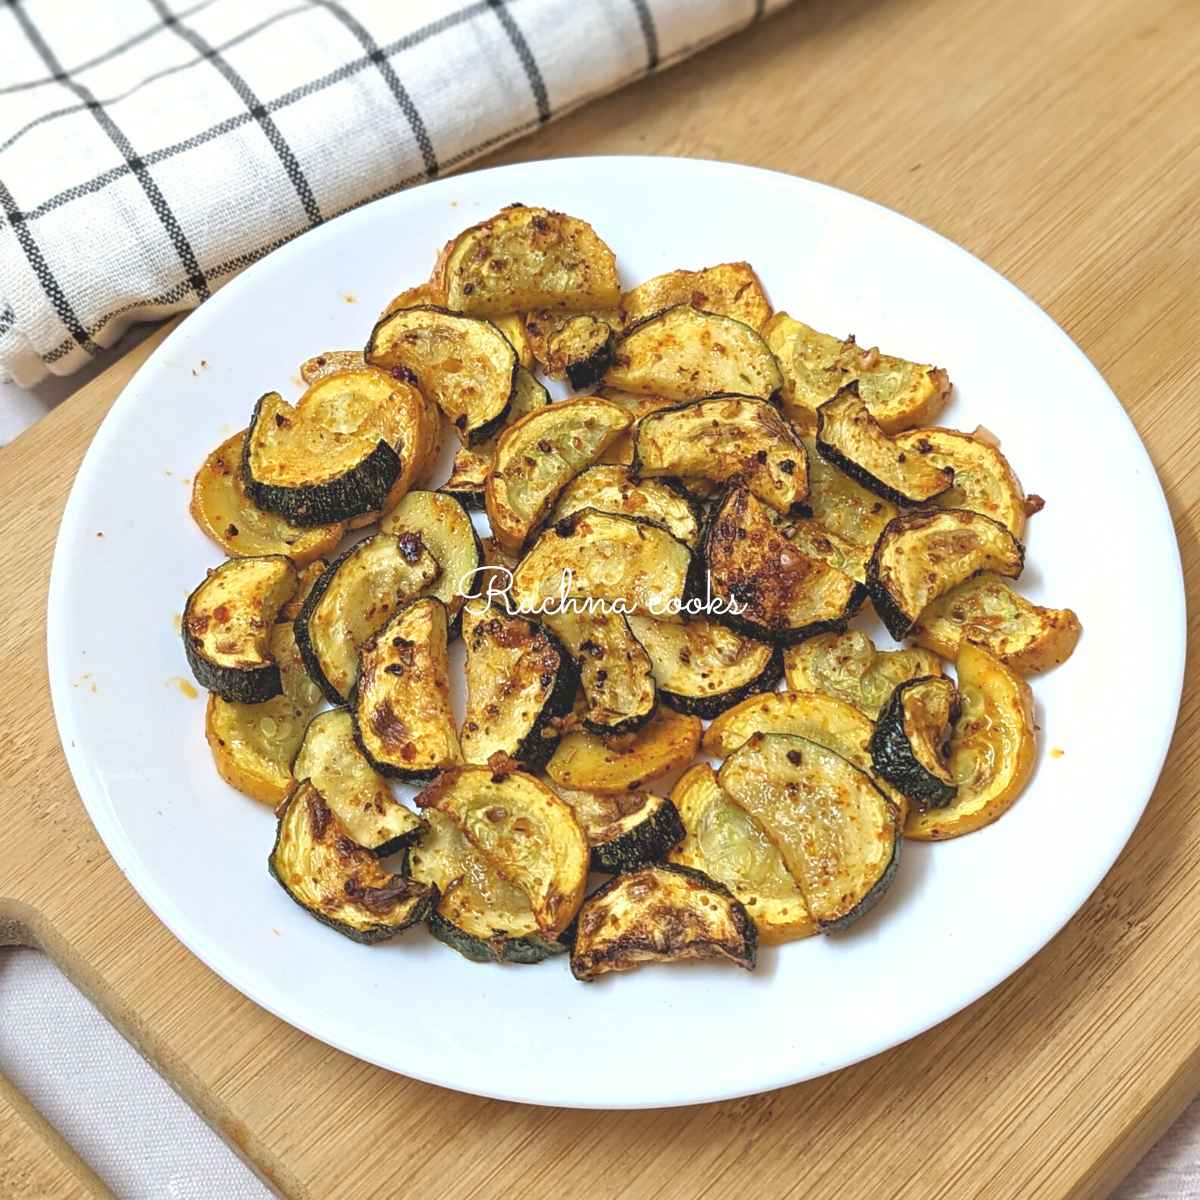 Air fried zucchini and squash slices served on a white plate.